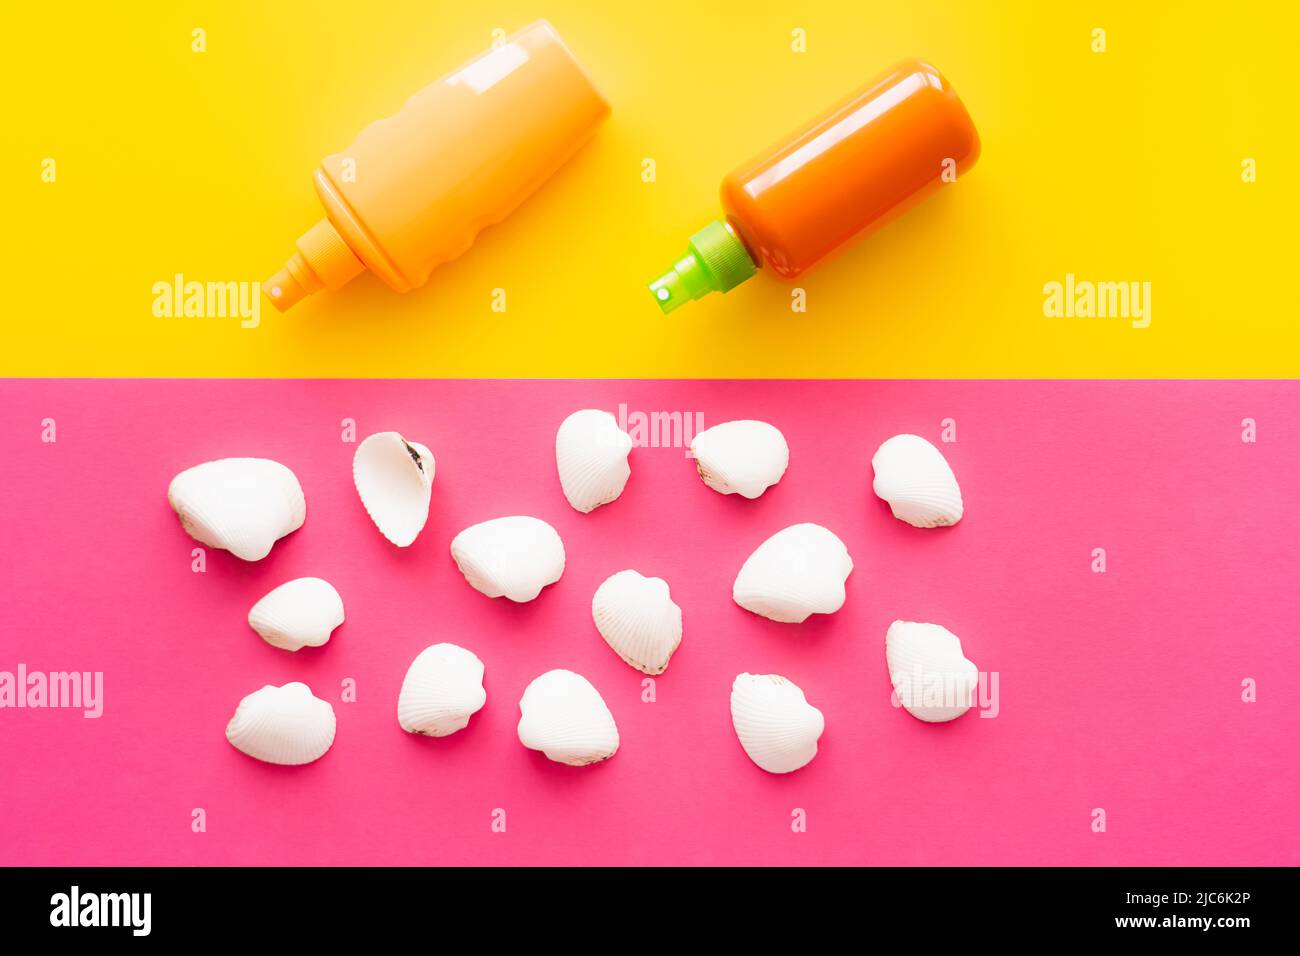 Top view of seashells near bottles of sunscreens on yellow and pink background Stock Photo